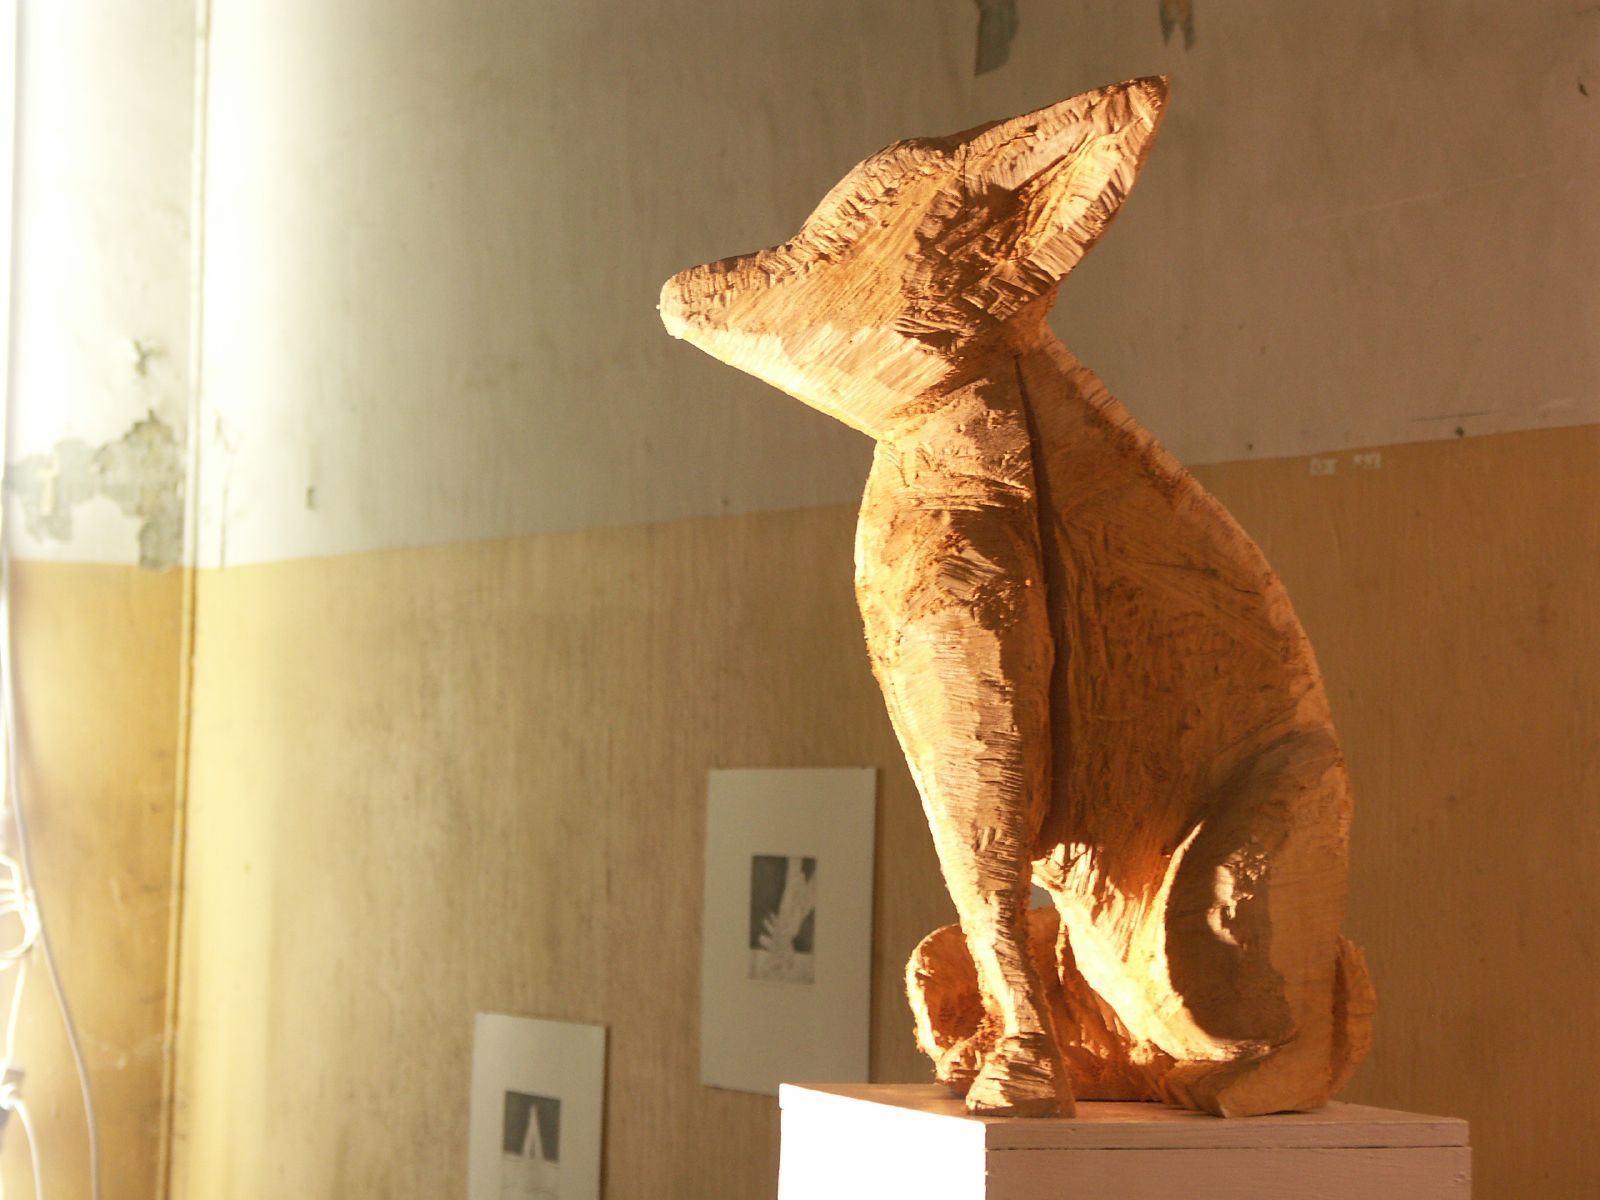 a small sculpture of a dog is shown